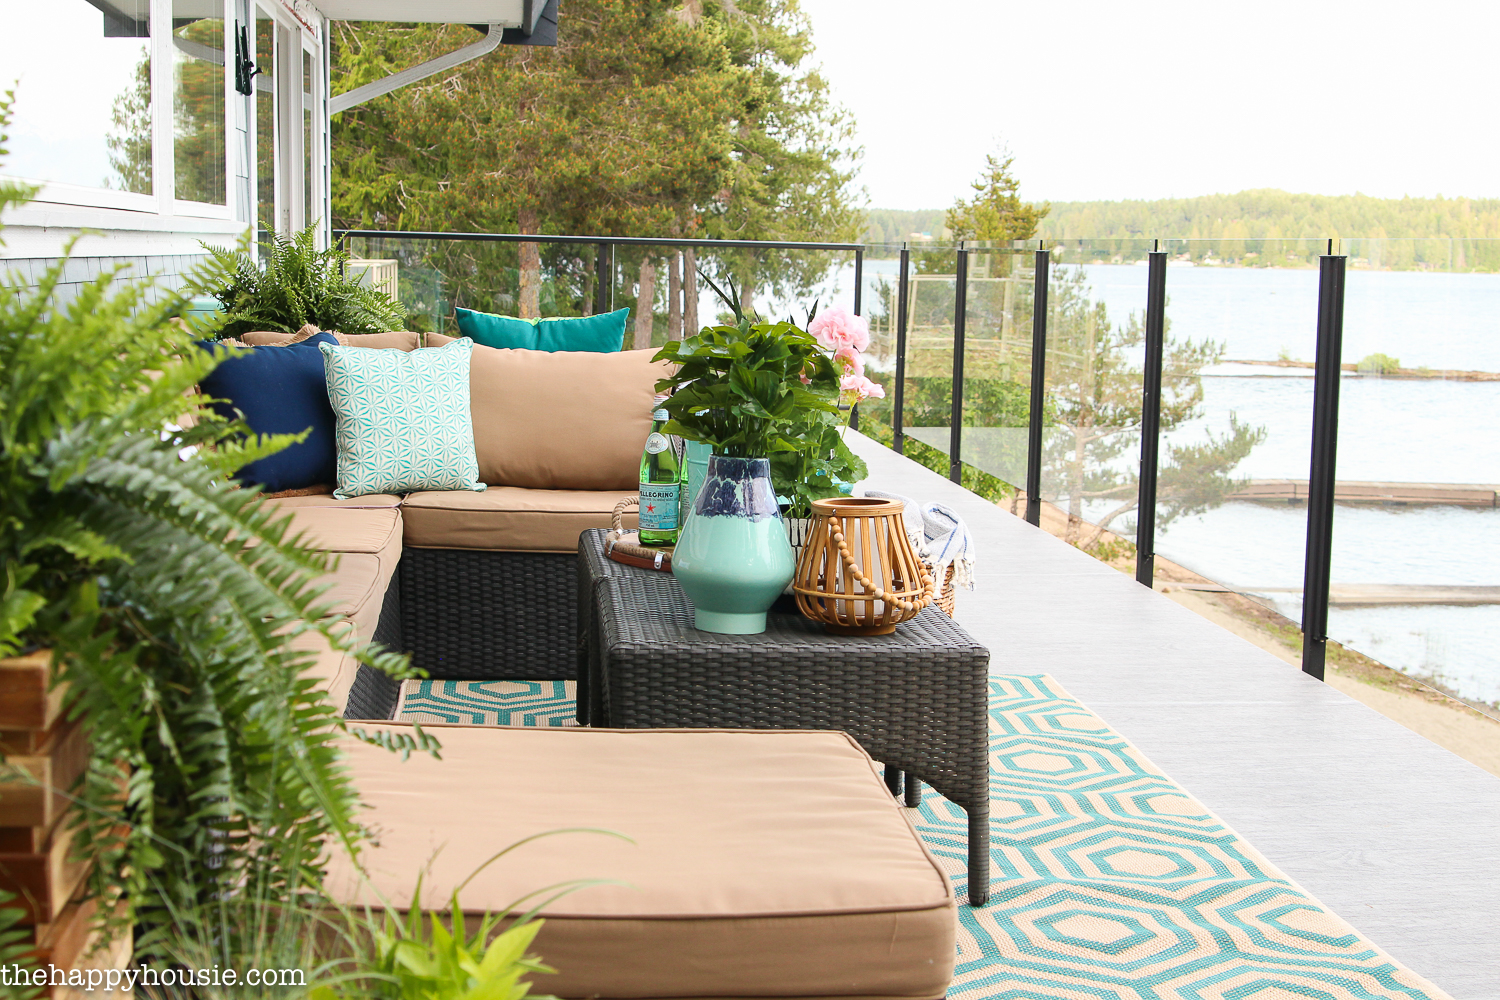 A porch overlooking the lake with an outdoor couch.